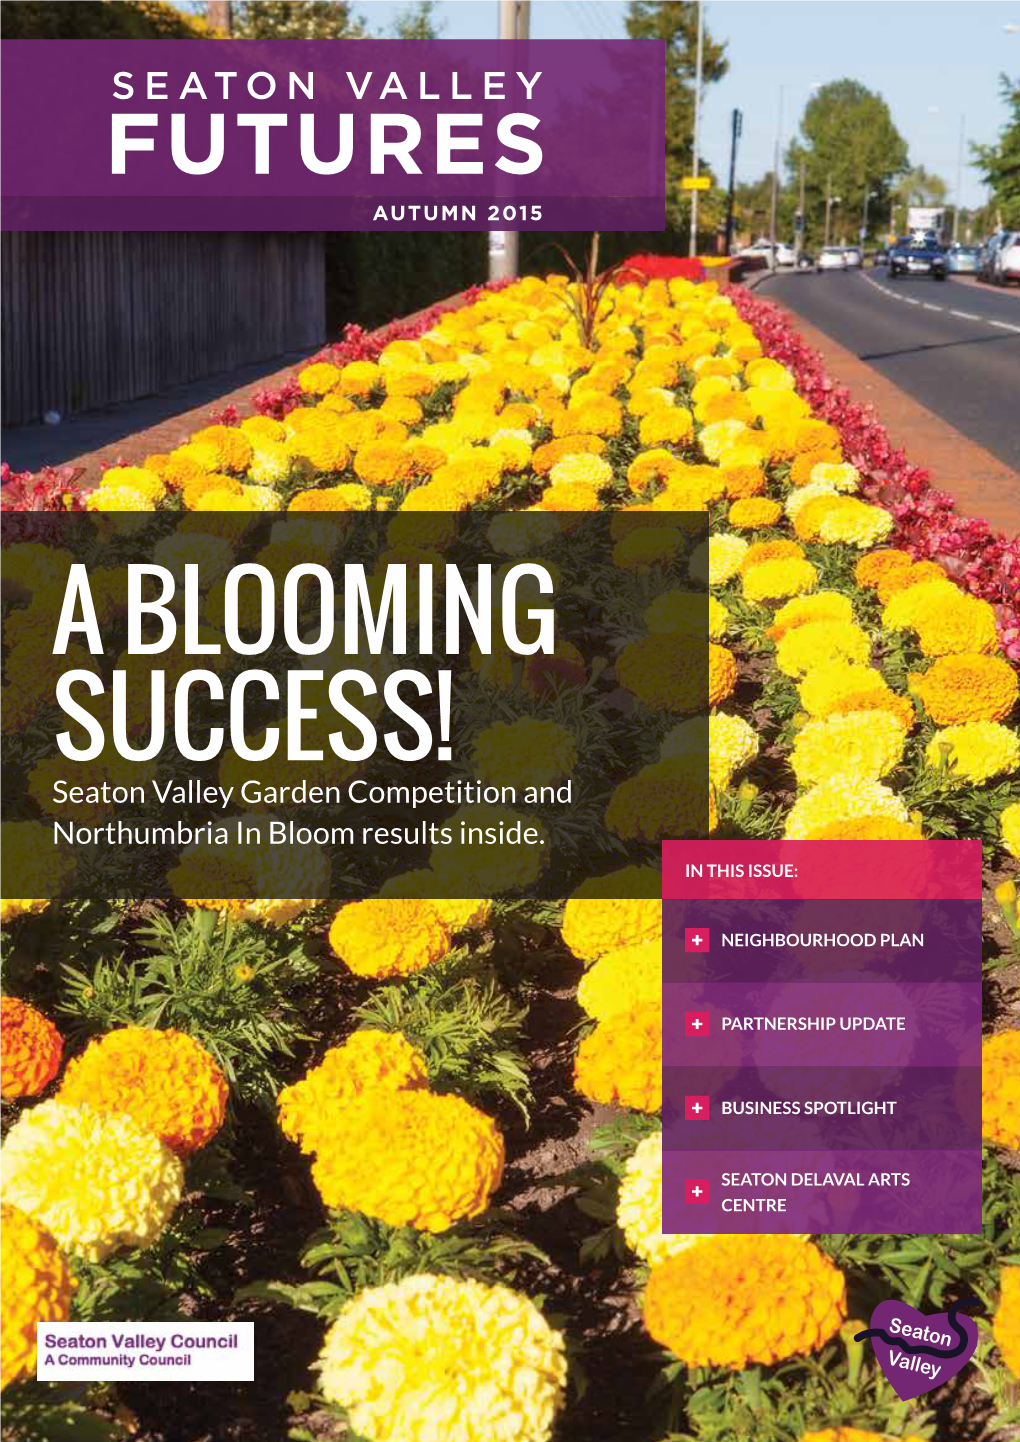 A BLOOMING SUCCESS! Seaton Valley Garden Competition and Northumbria in Bloom Results Inside